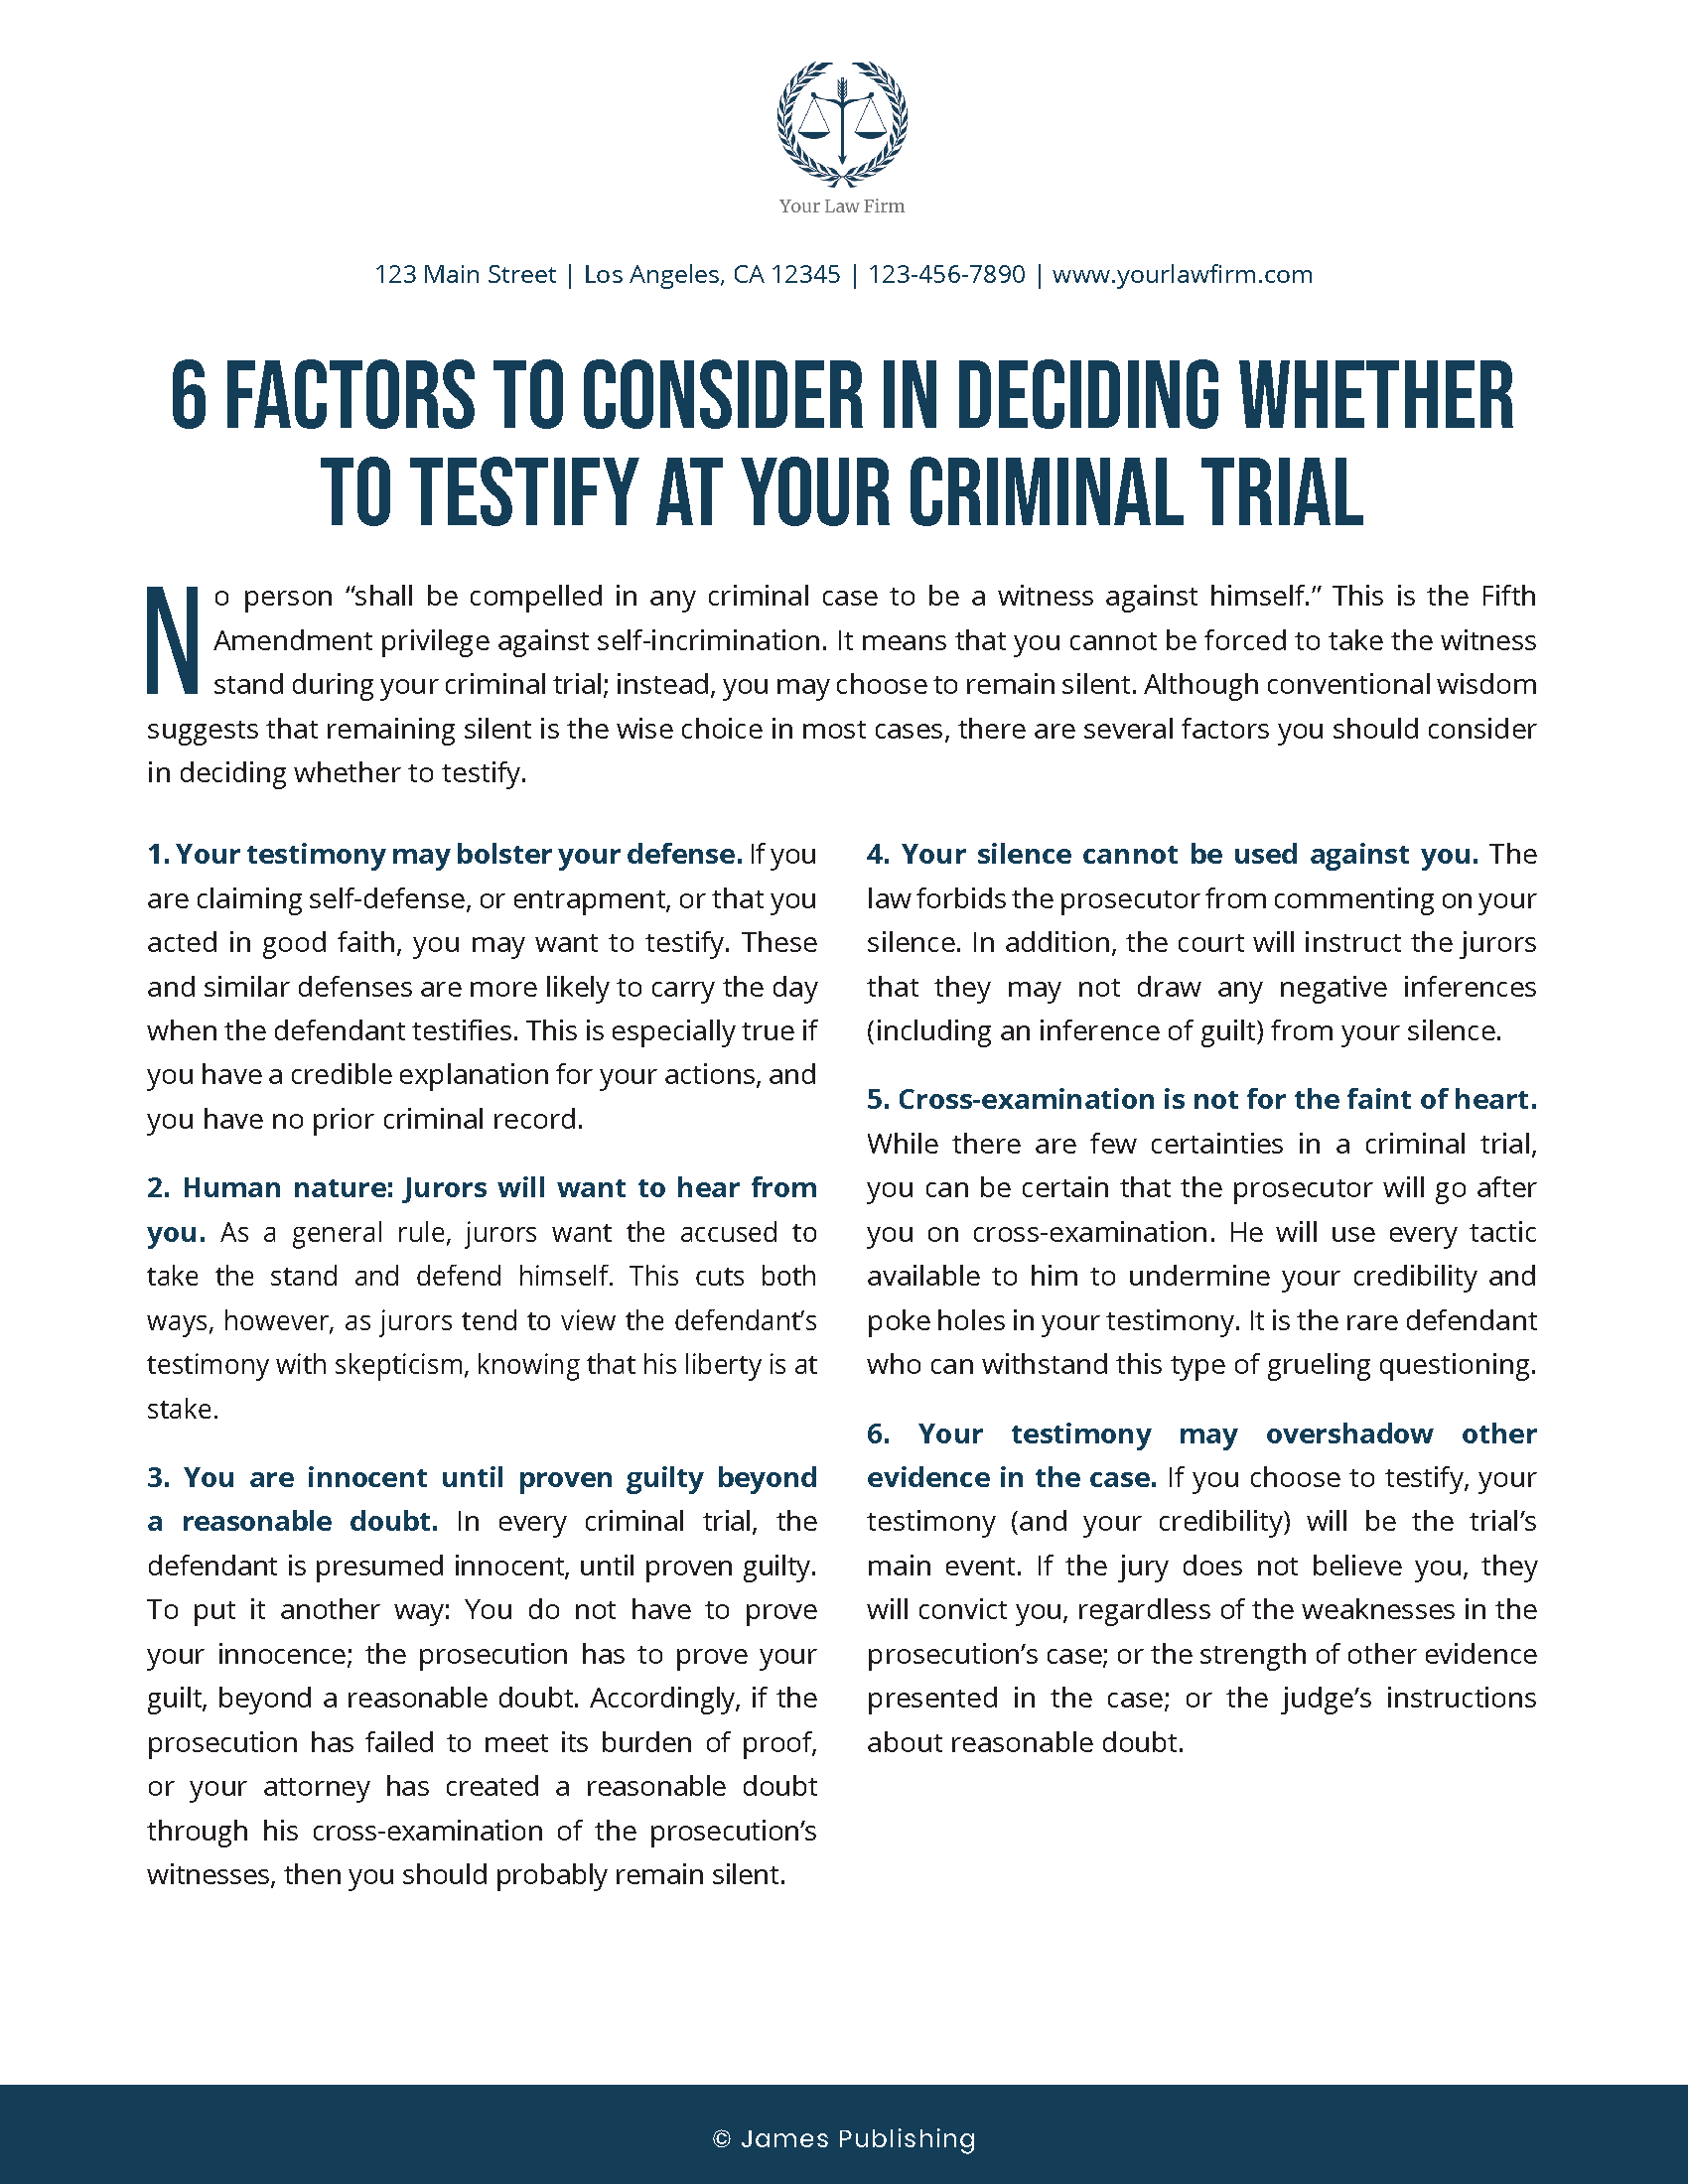 CRIM-07 6 Factors to Consider in Deciding Whether to Testify at Your Criminal Trial